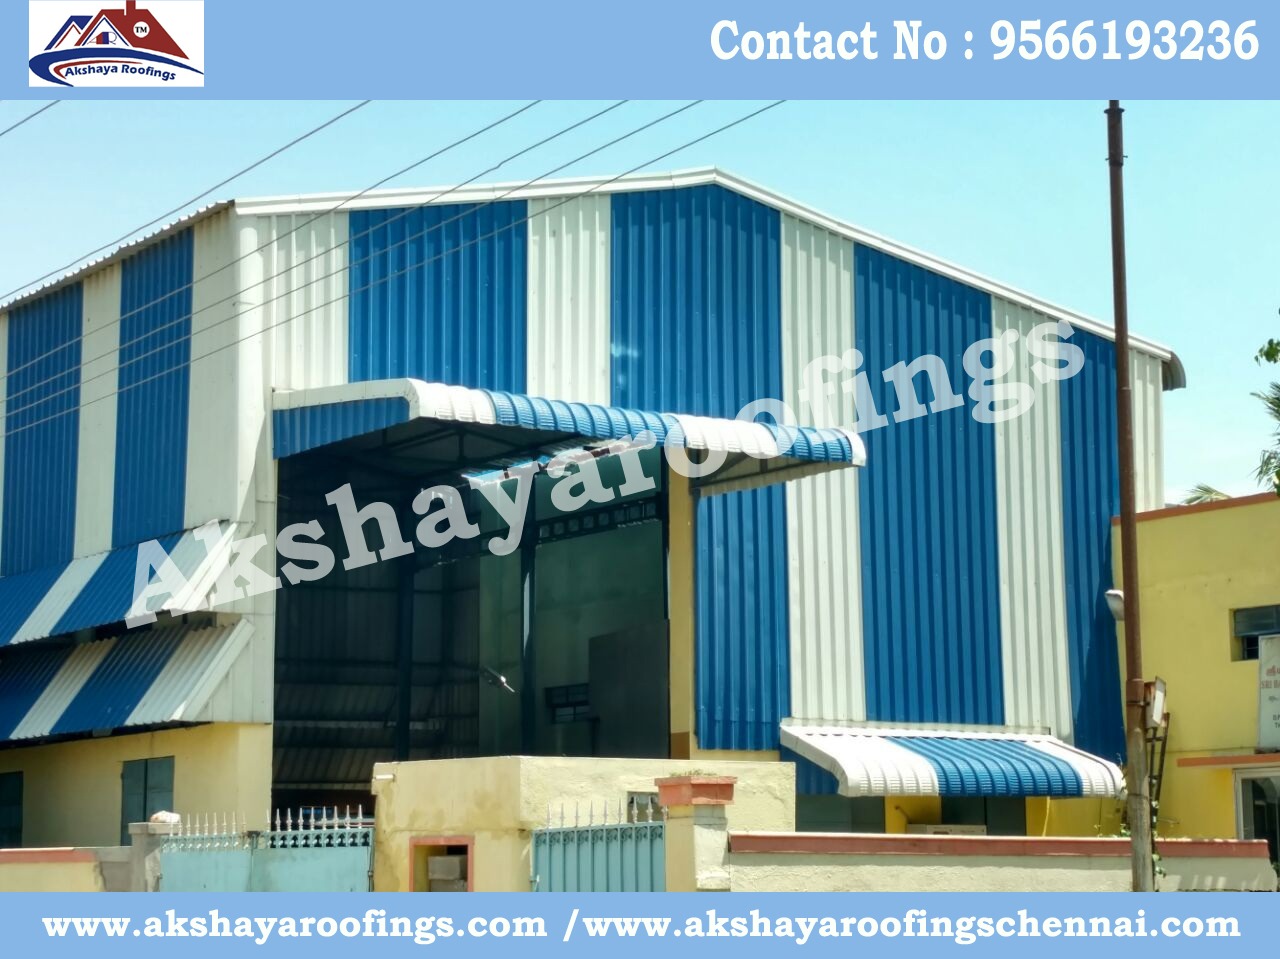 Parking Shed Roofing Contractors in Chennai